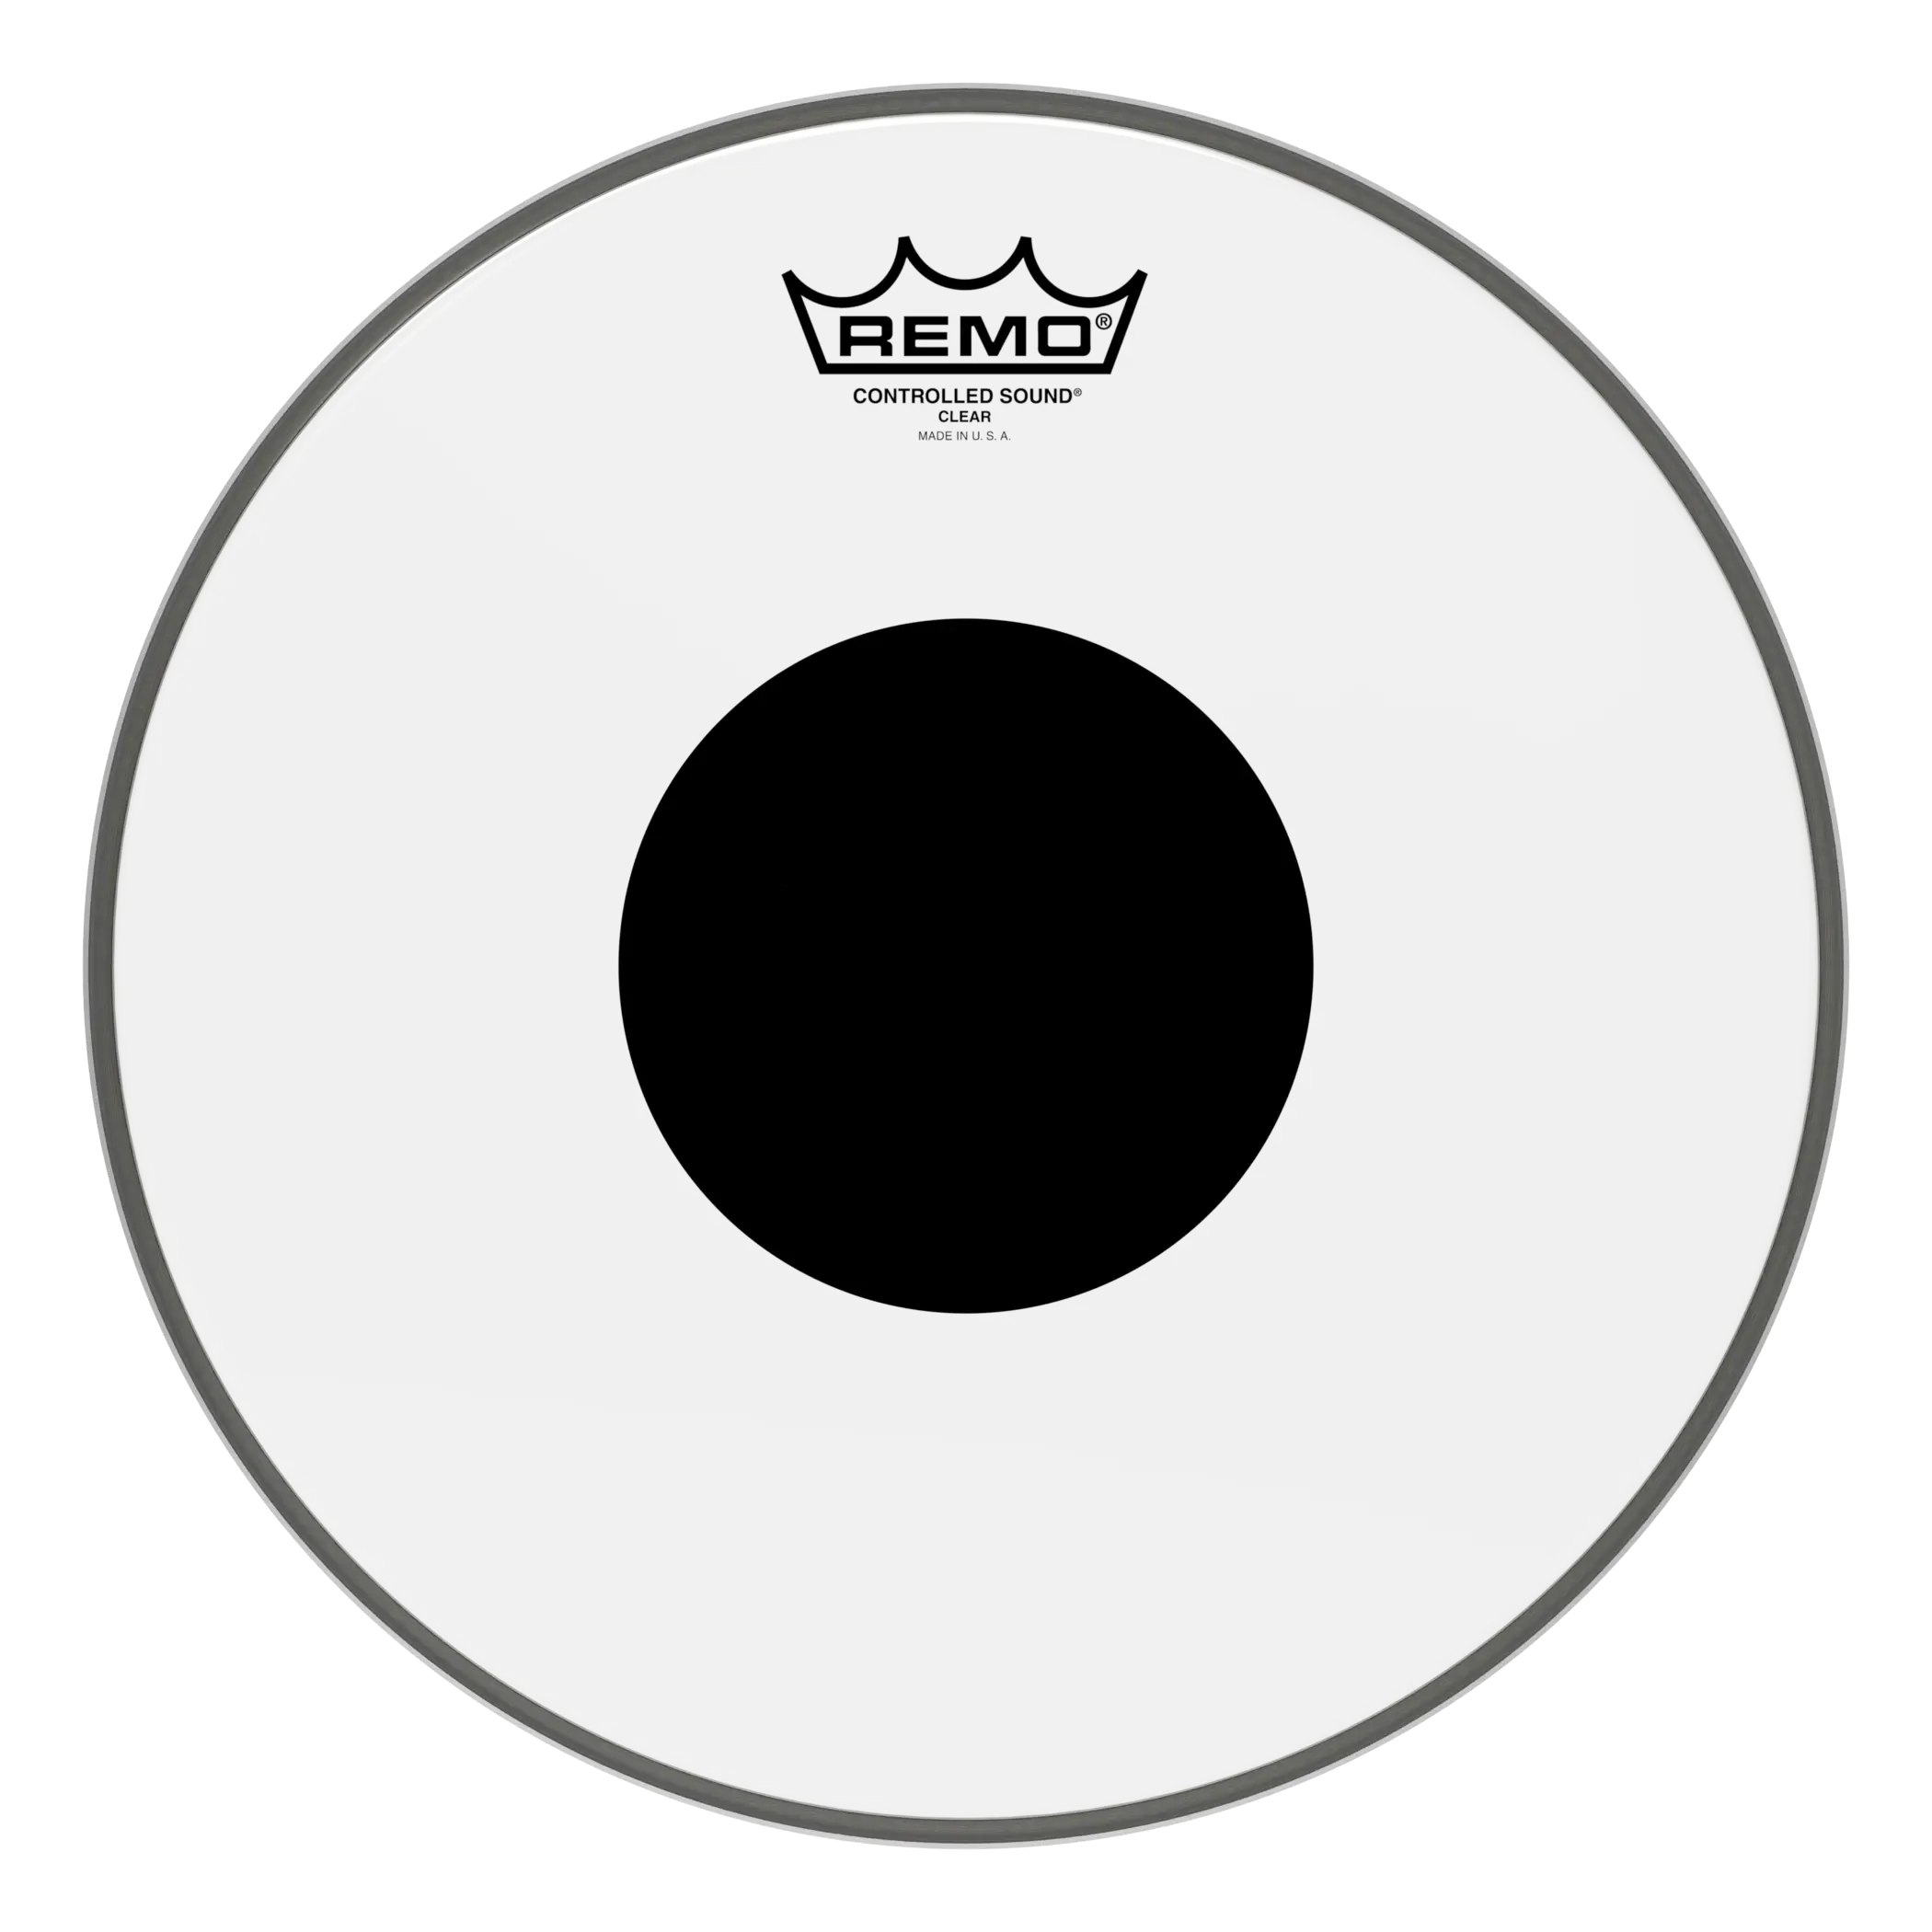 Remo 12" Controlled Sound Black Dot Clear Drumhead